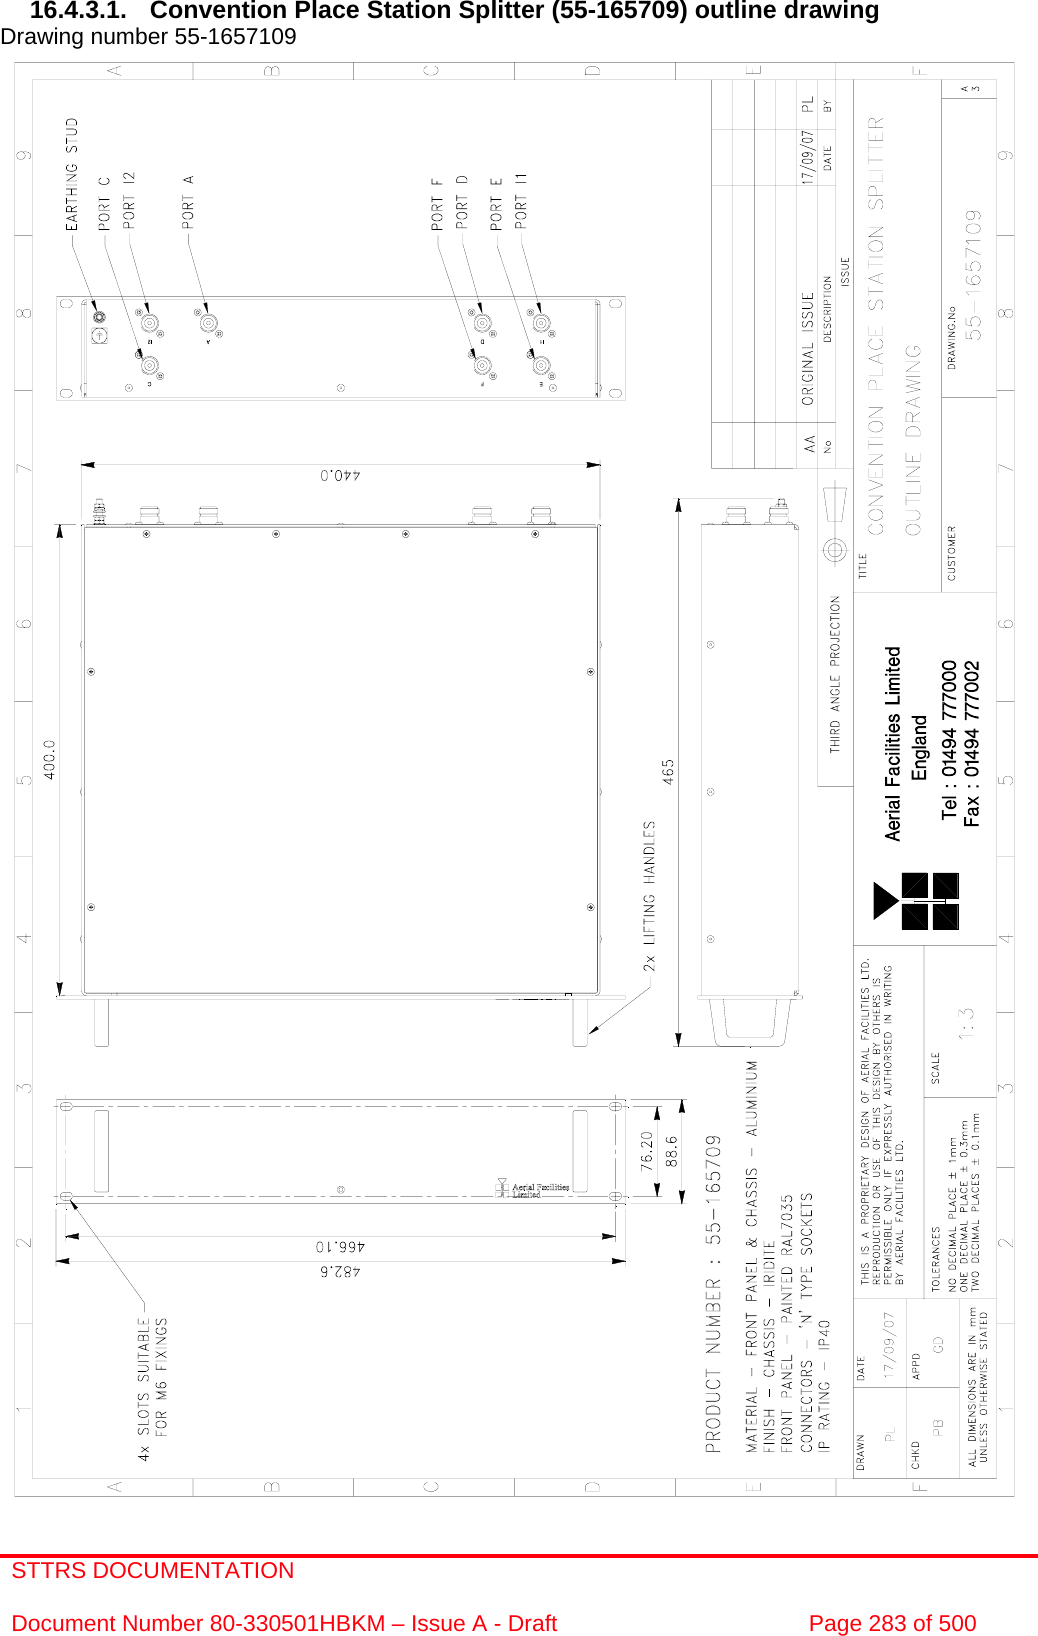 STTRS DOCUMENTATION  Document Number 80-330501HBKM – Issue A - Draft  Page 283 of 500   16.4.3.1. Convention Place Station Splitter (55-165709) outline drawing Drawing number 55-1657109                                           